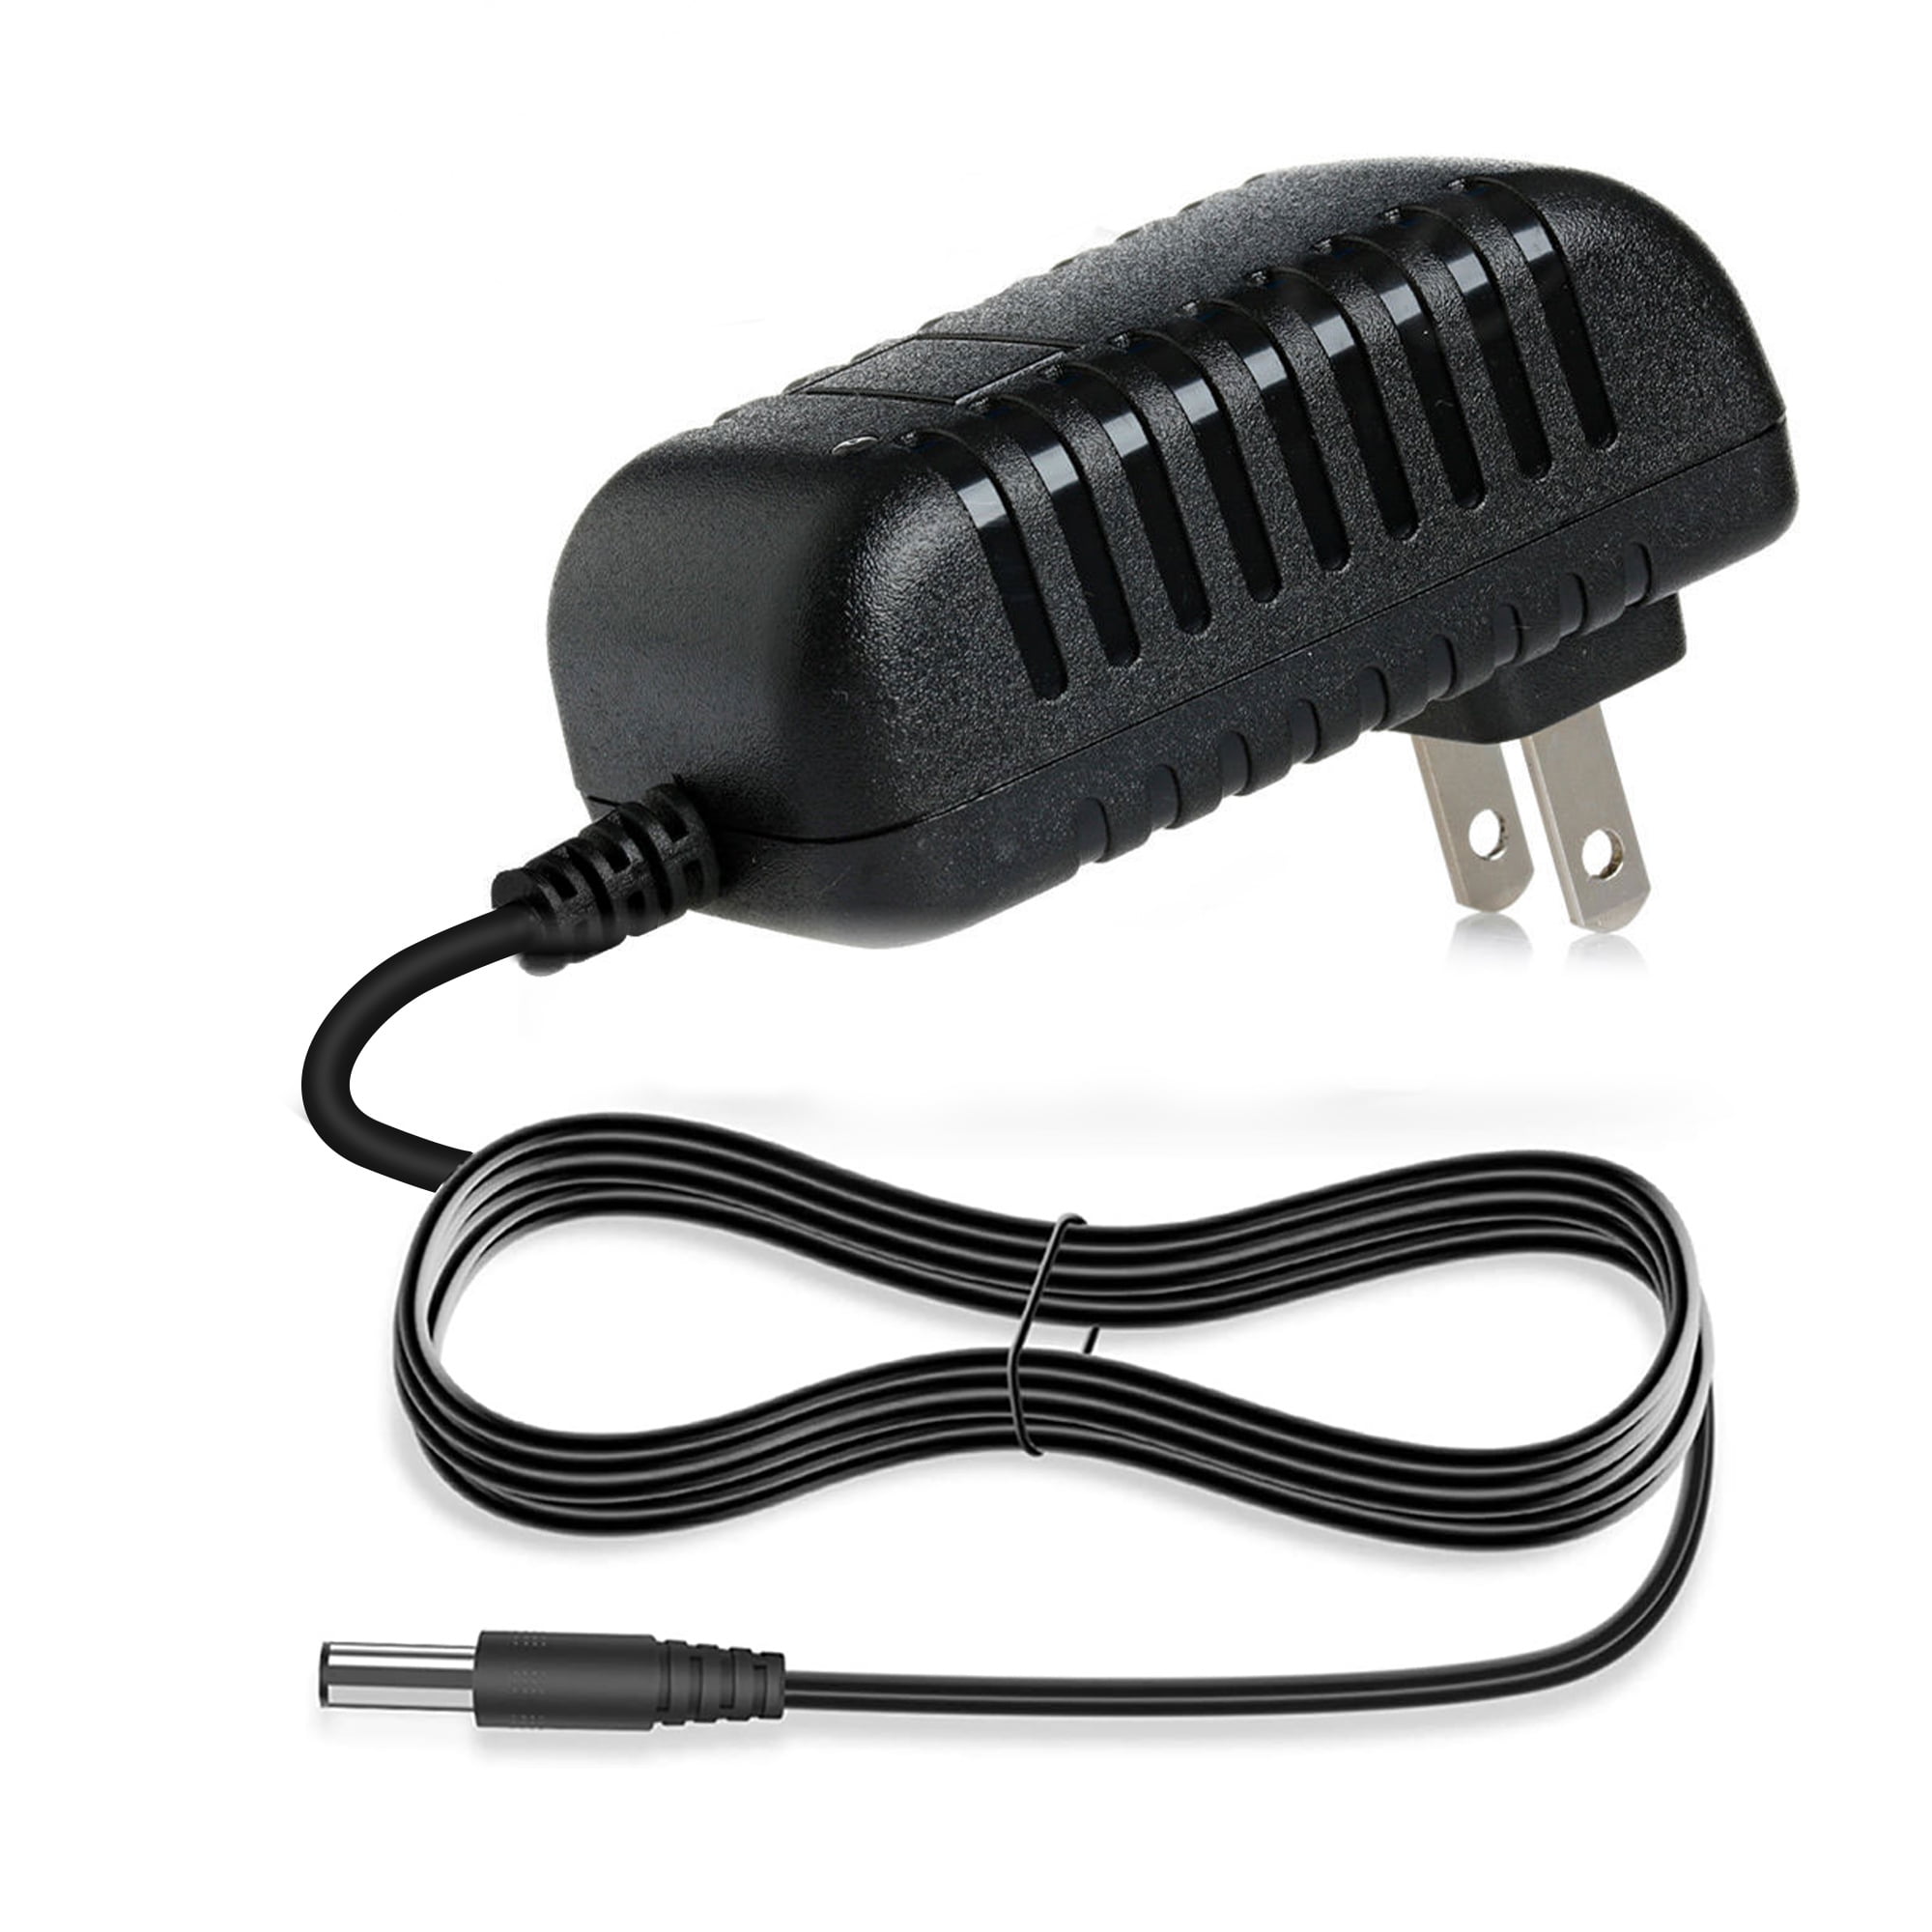 AC Power Adapter Cord for Midland GXT 860 VP4 GXT 895 VP4 Radio Desktop Charger 